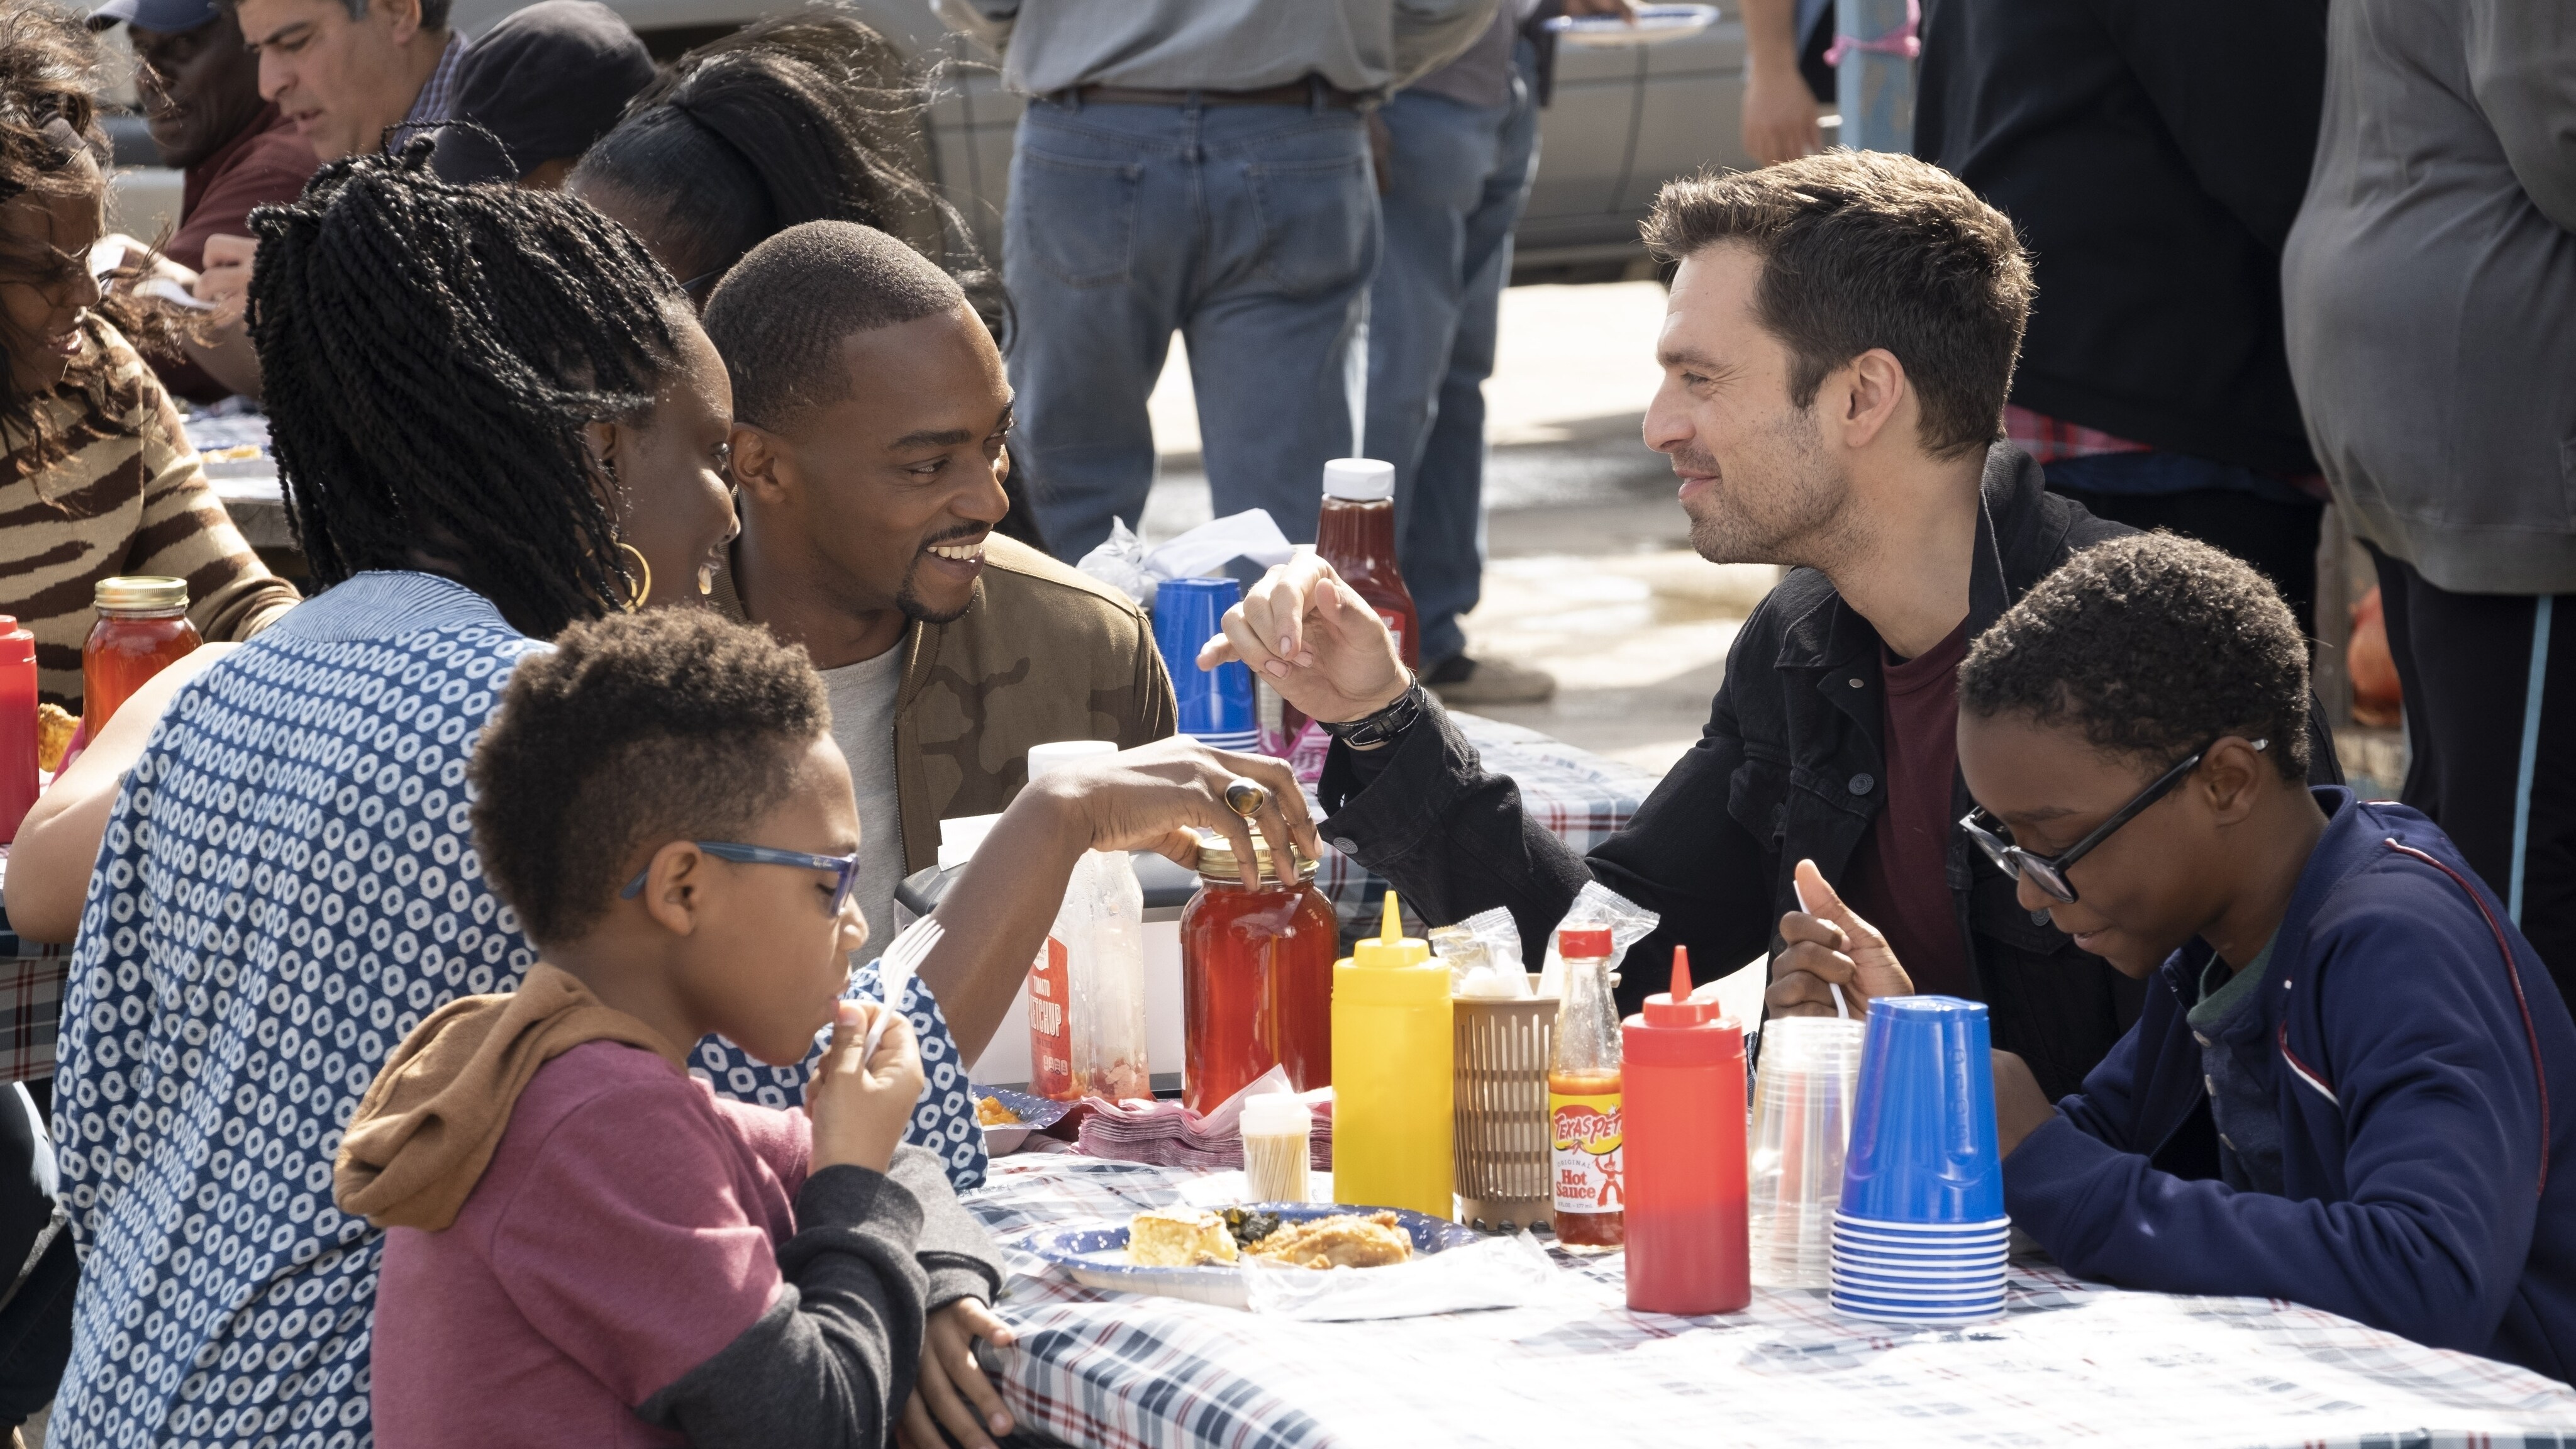 (L-R): Sarah Wilson (Adepero Oduye), Falcon/Sam Wilson (Anthony Mackie) and Winter Soldier/Bucky Barnes (Sebastian Stan) in Marvel Studios' THE FALCON AND THE WINTER SOLDIER exclusively on Disney+. Photo by Chuck Zlotnick. ©Marvel Studios 2021. All Rights Reserved. 